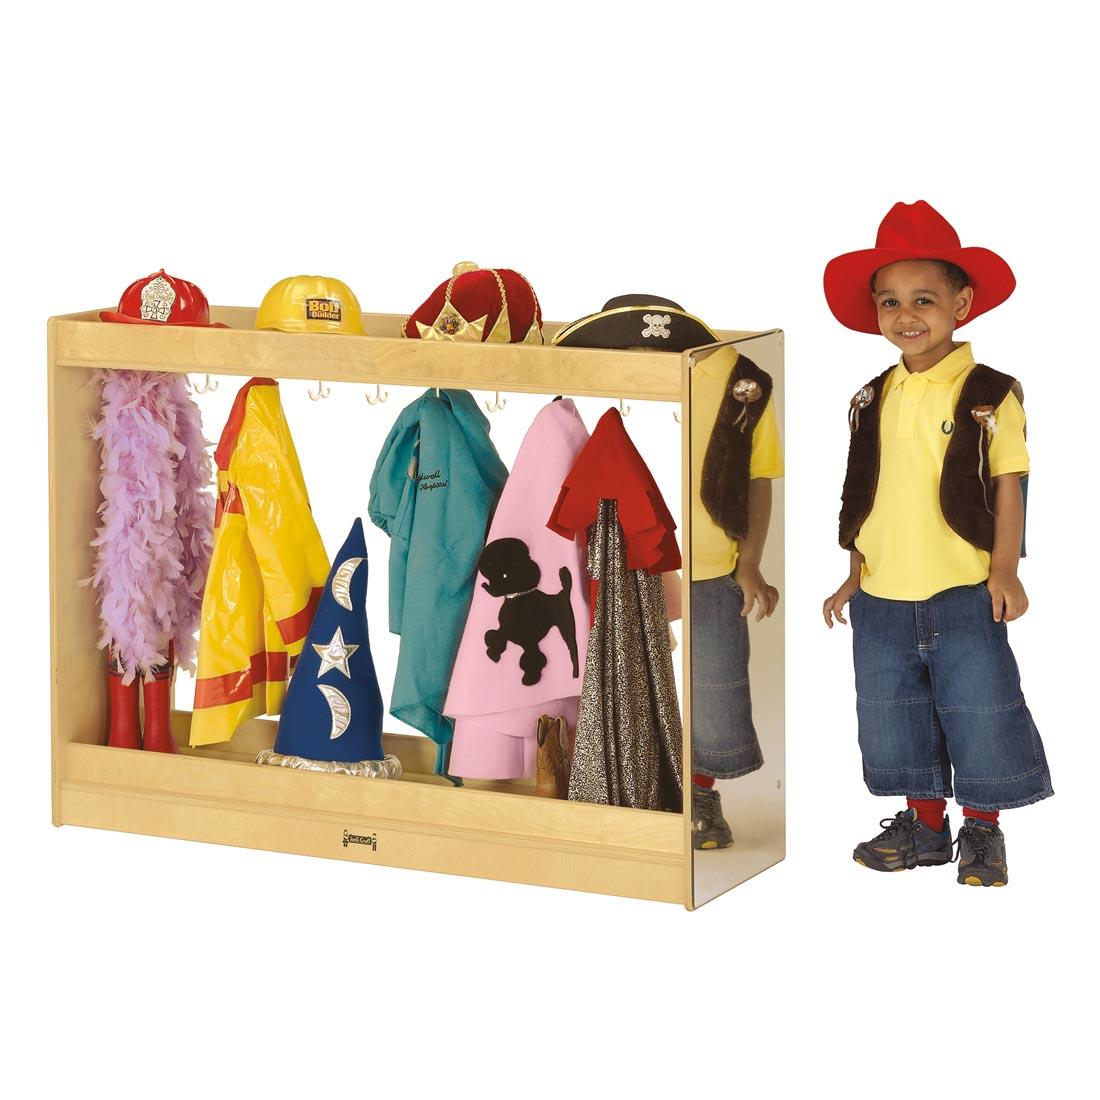 Child standing next to the Dress Up Island filled with costumes